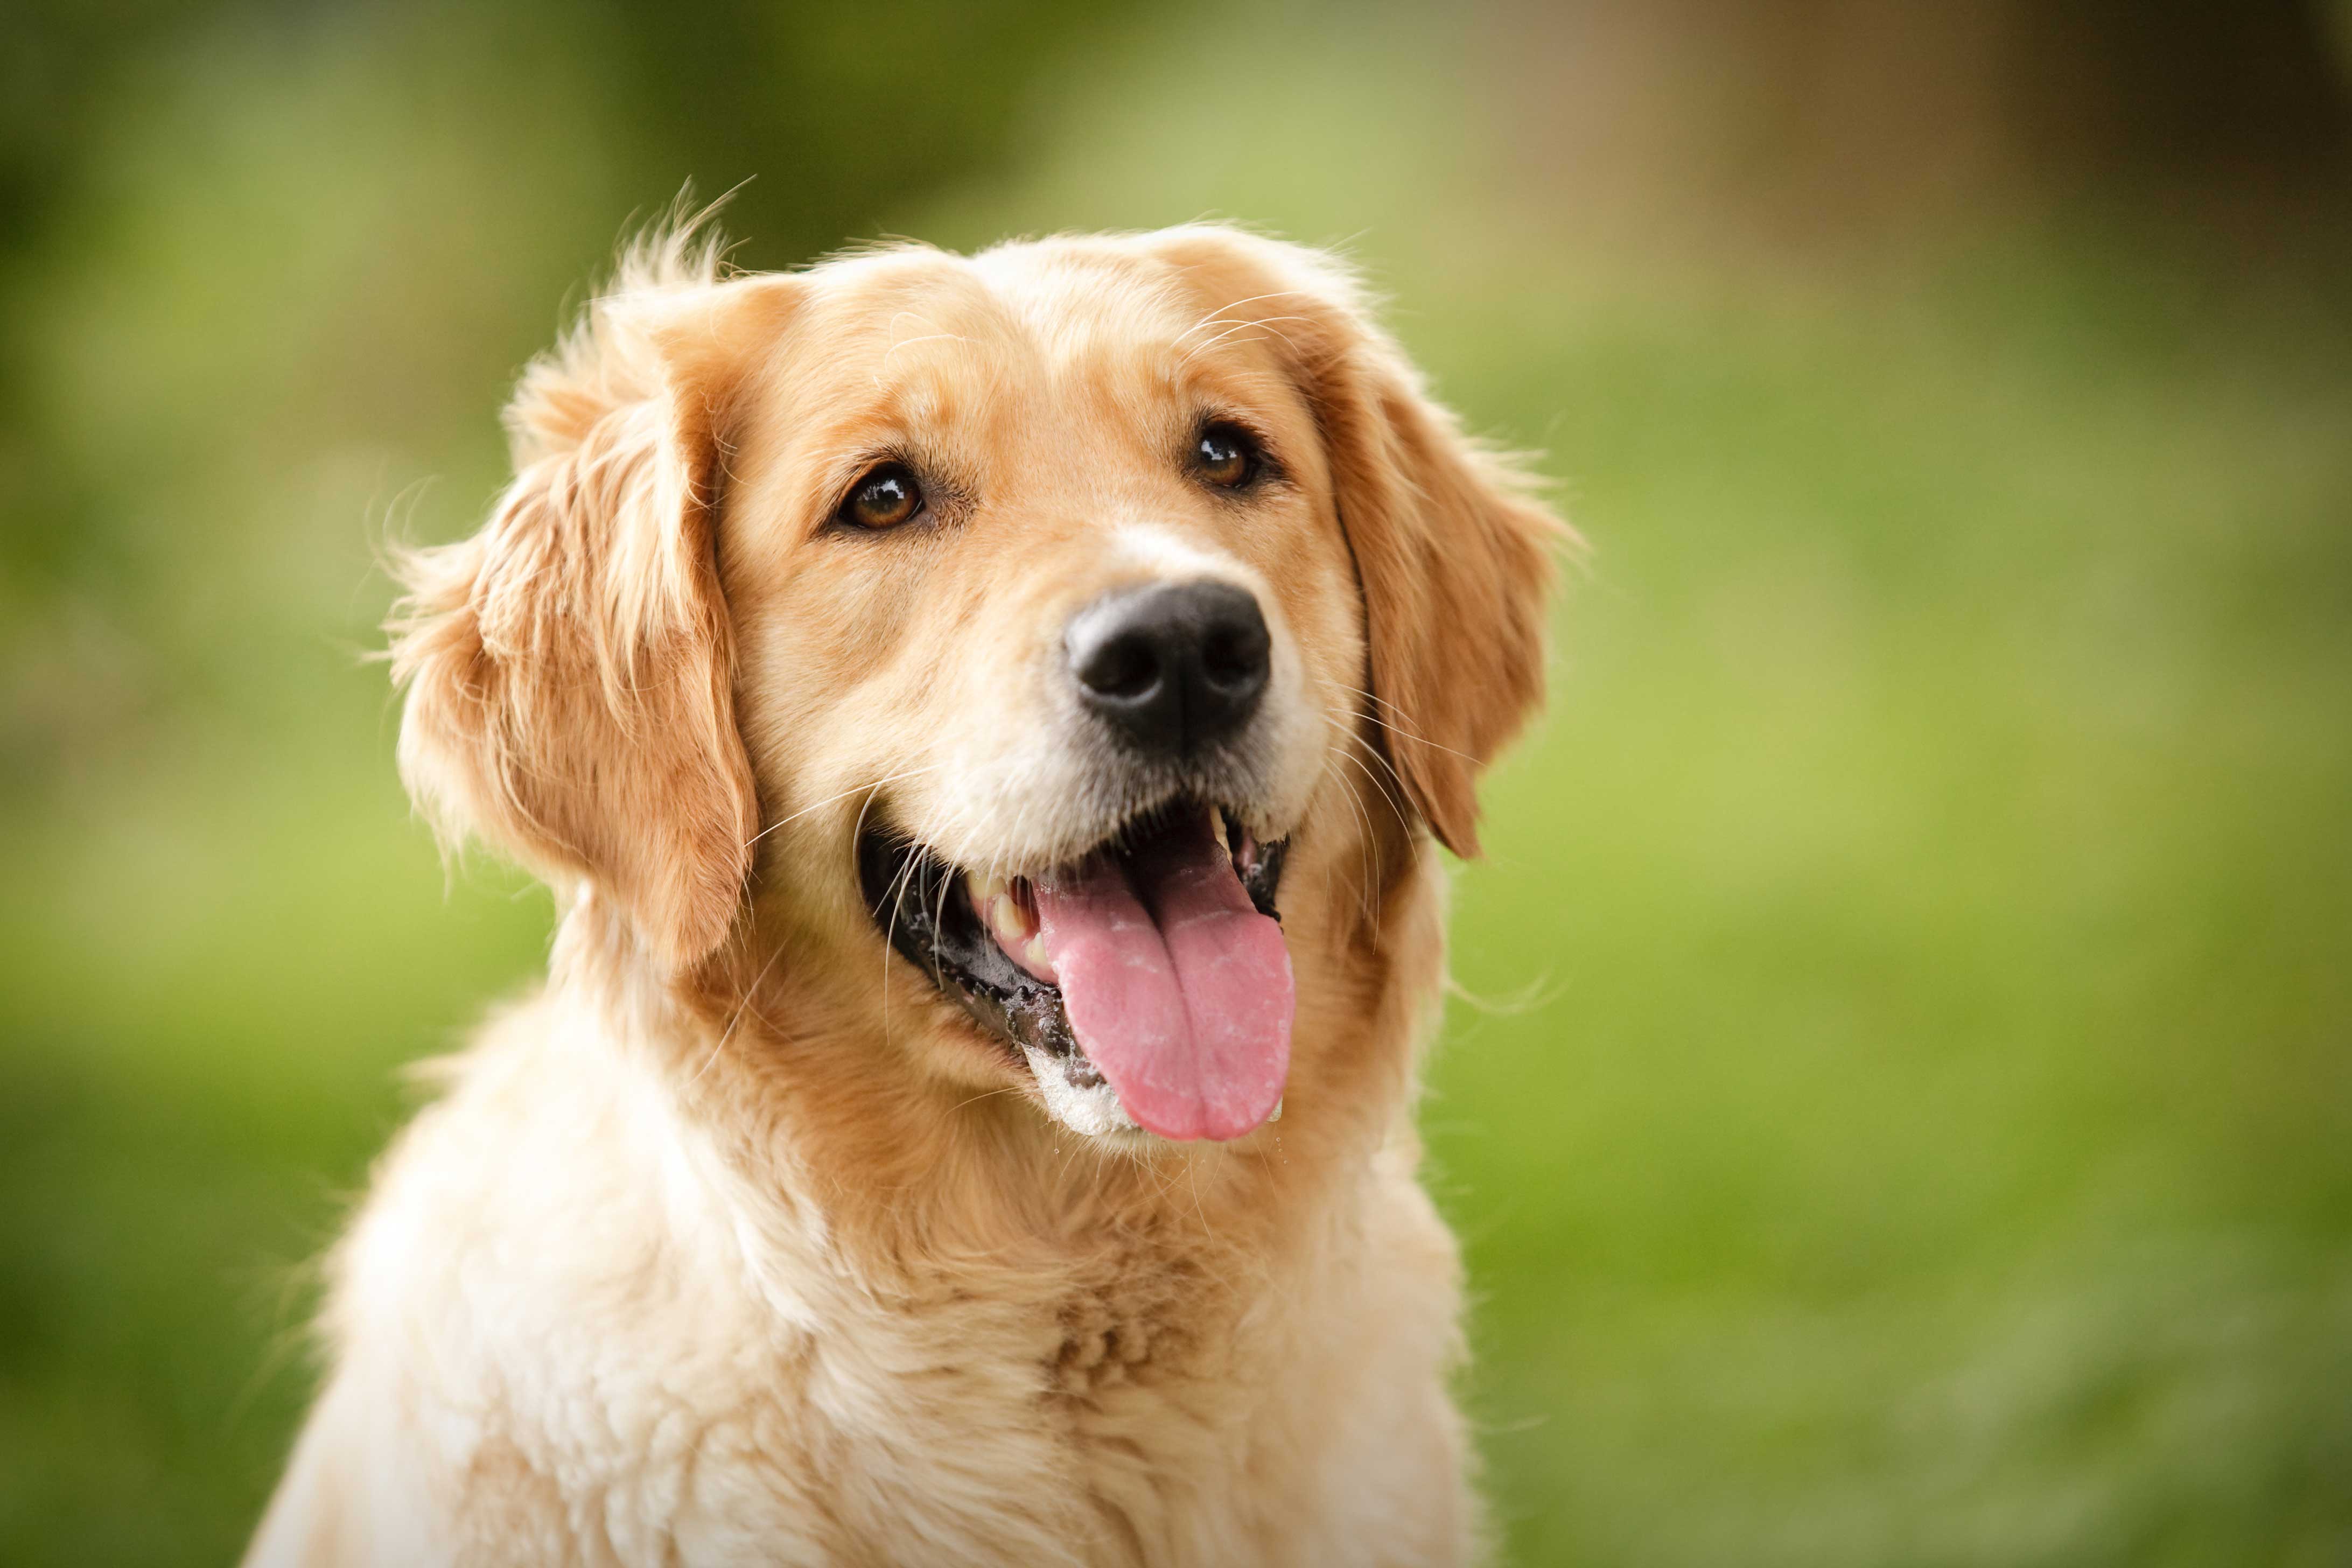 Golden Retriever Wallpapers, Pictures, Images - Long HaireD GolDen Retriever